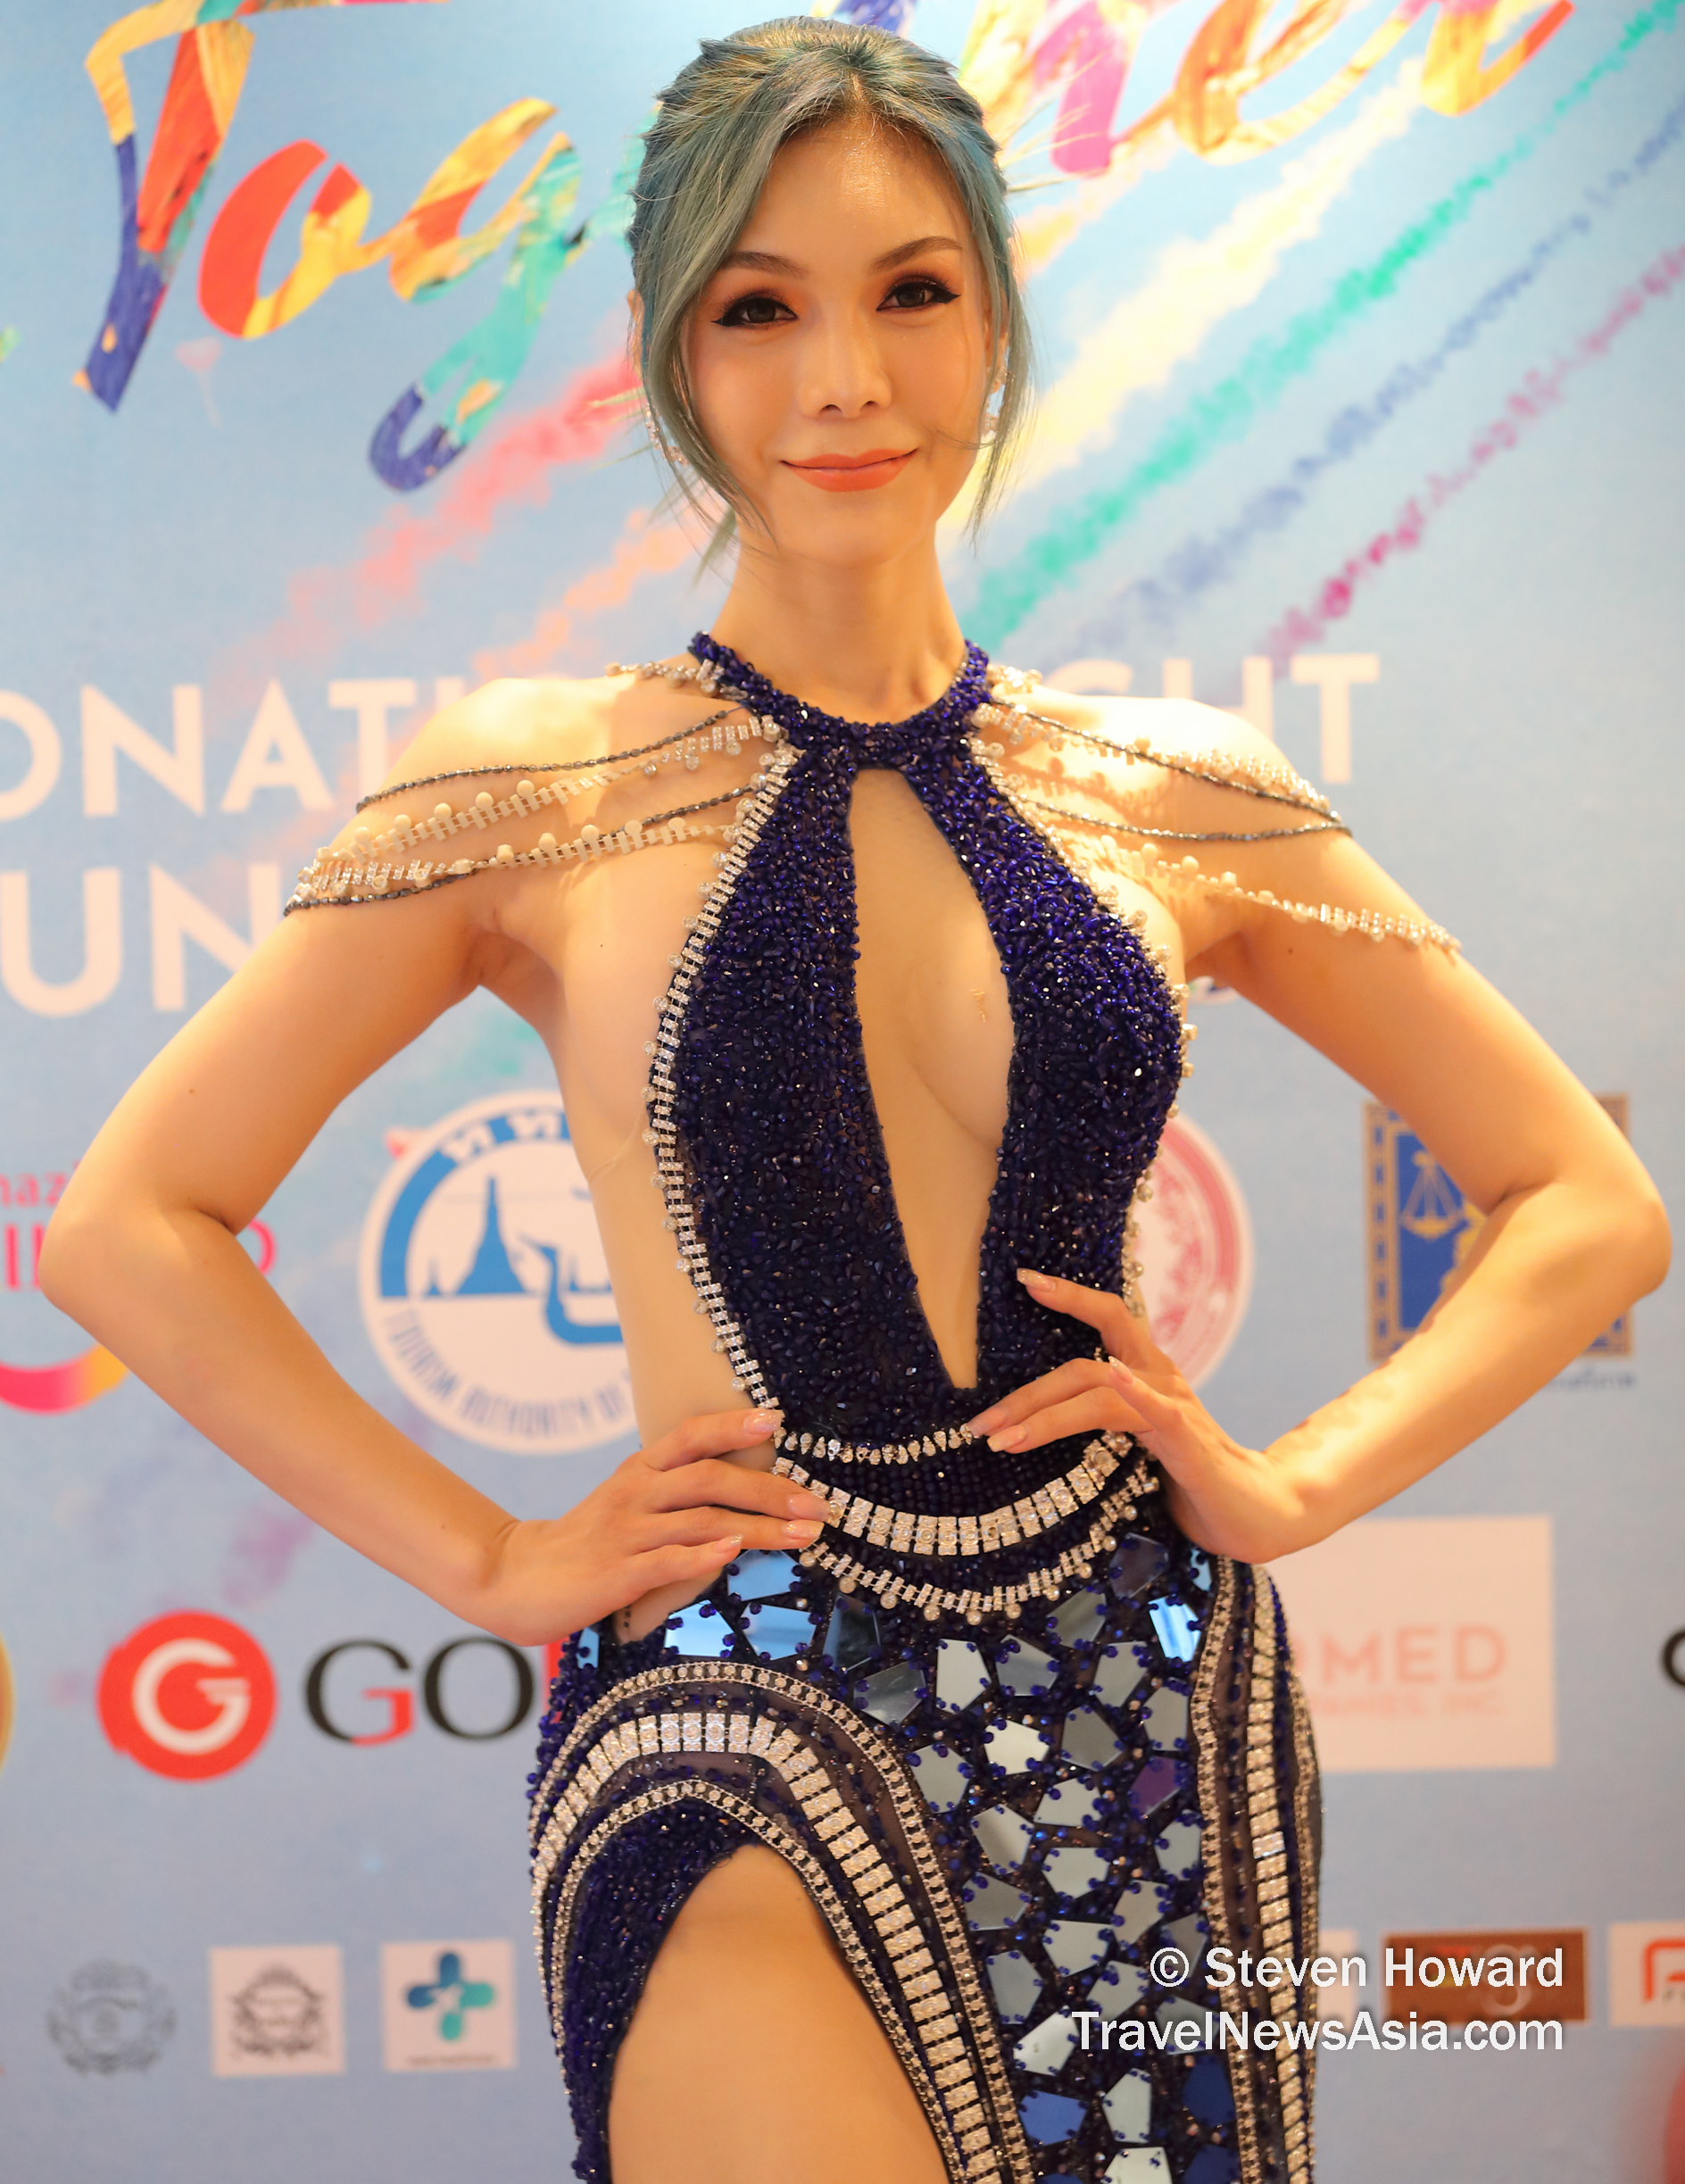 Pictures from Miss International Queen 2022 Transgender Beauty Pageant in Pattaya, Thailand. Pictures by Steven Howard of TravelNewsAsia.com